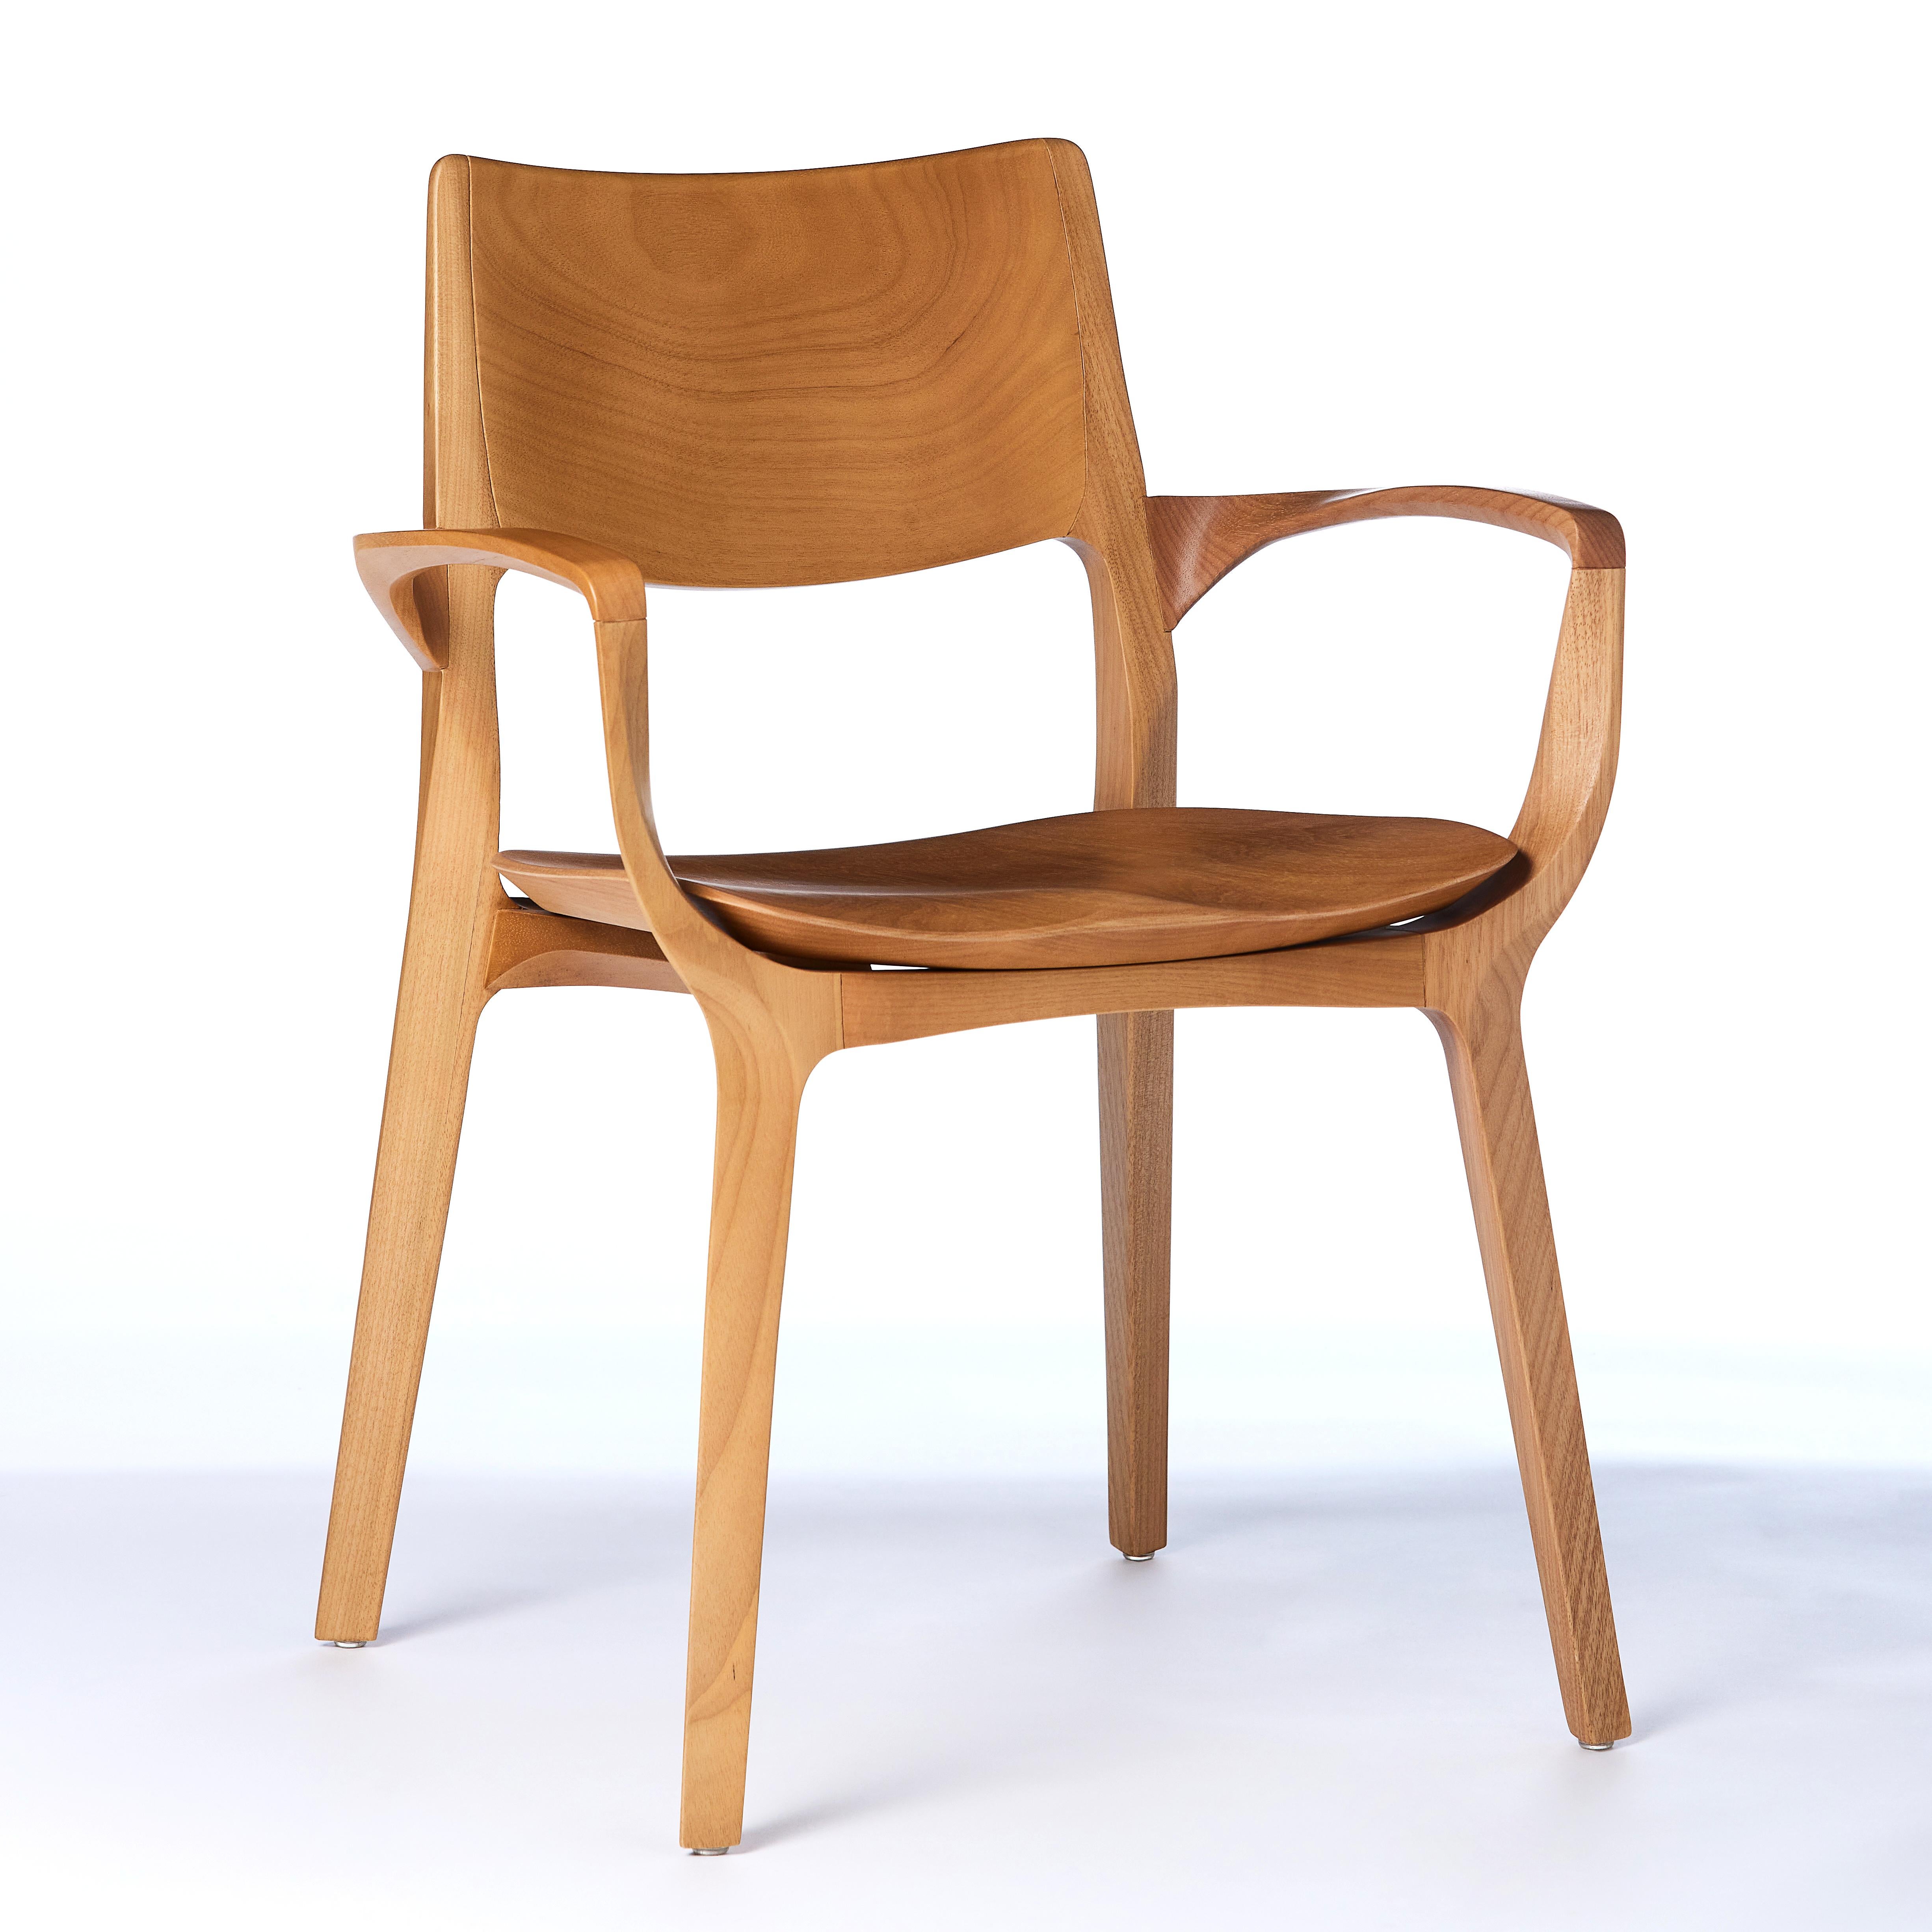 Modern Style Aurora Chair Sculpted in Walnut Finish No Arms, leather seating For Sale 5